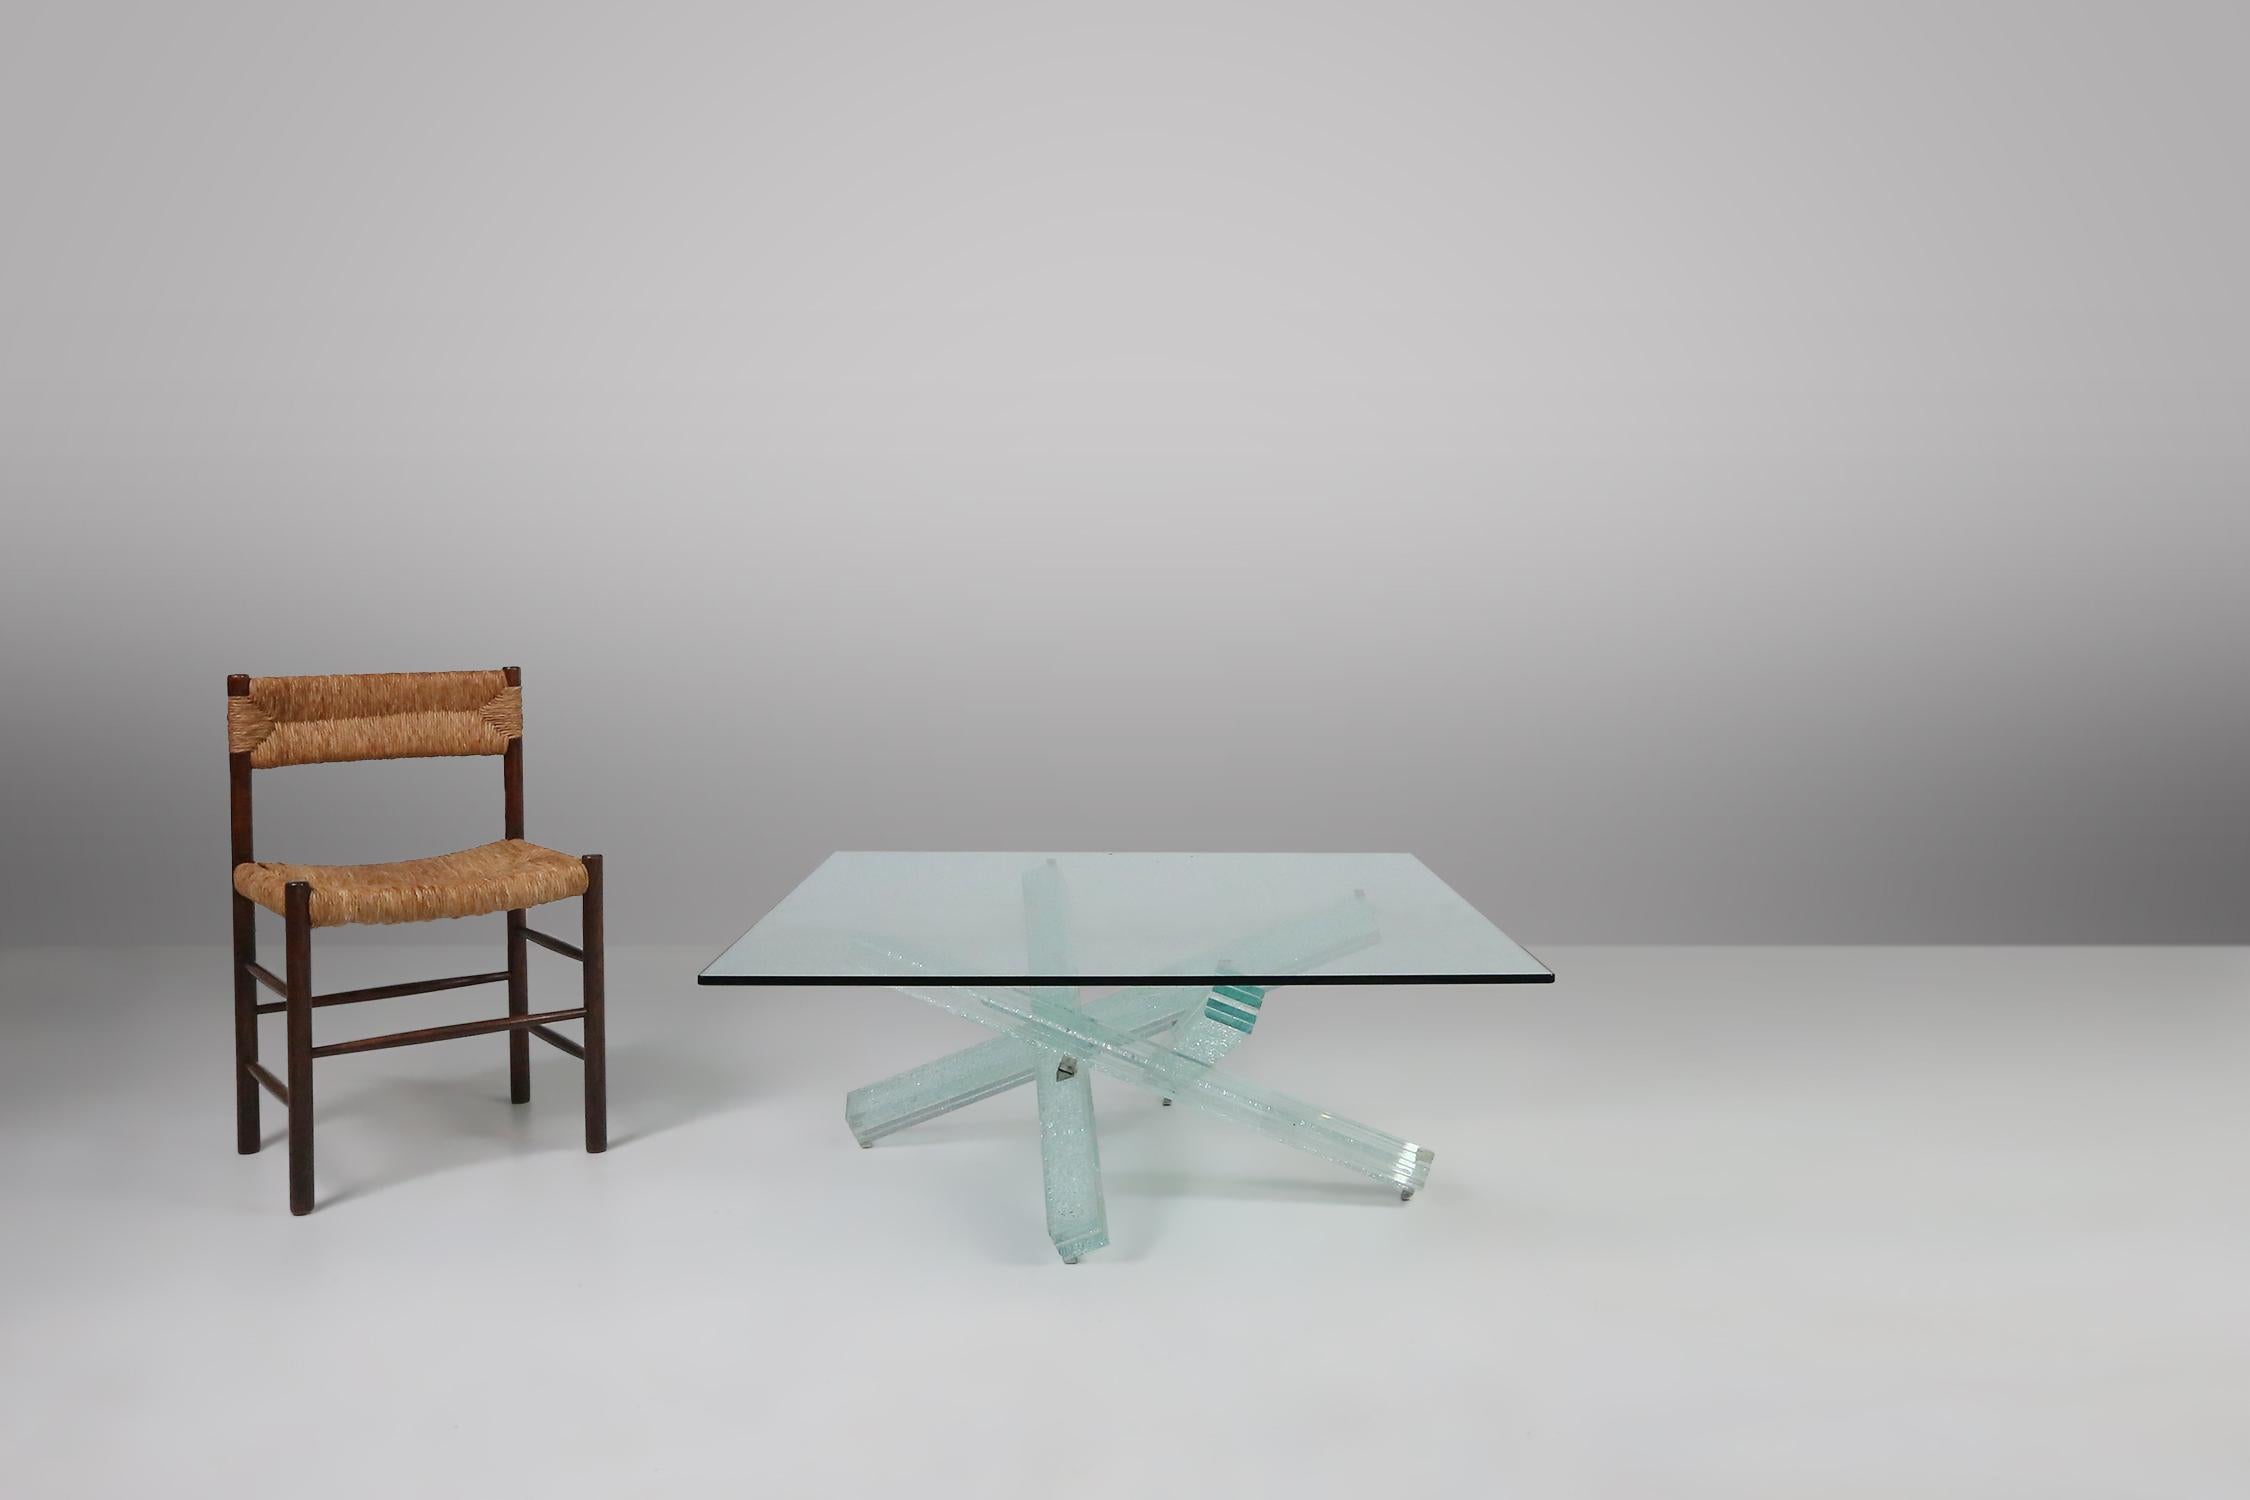 This coffee table is a masterpiece of design and craftsmanship, created by famous French designer Maurice Barilone for the brand Roche Bobois.

The table top is made of transparent glass 12 mm, with a square shape and rounded corners. The base